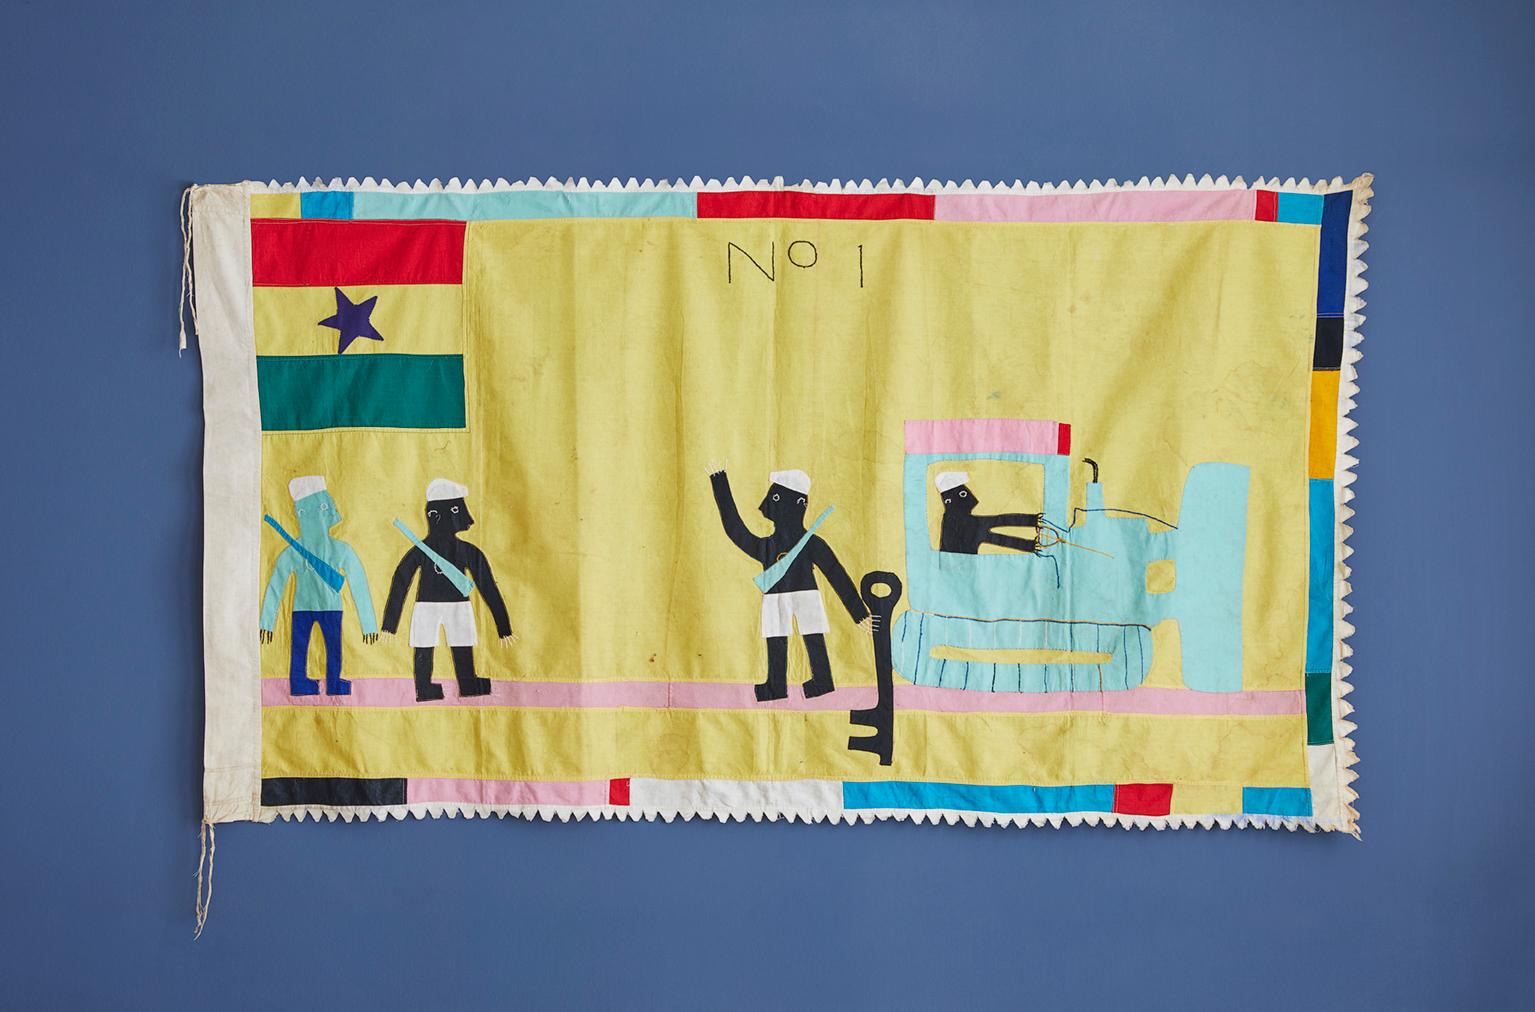 Asafo flag in cotton applique pattern by the Fante people. 

A unique and creative image, with an earth mover replacing earlier subjects as a metaphor for the strength boasted of by the company. Dates from circa 1970s. Condition is